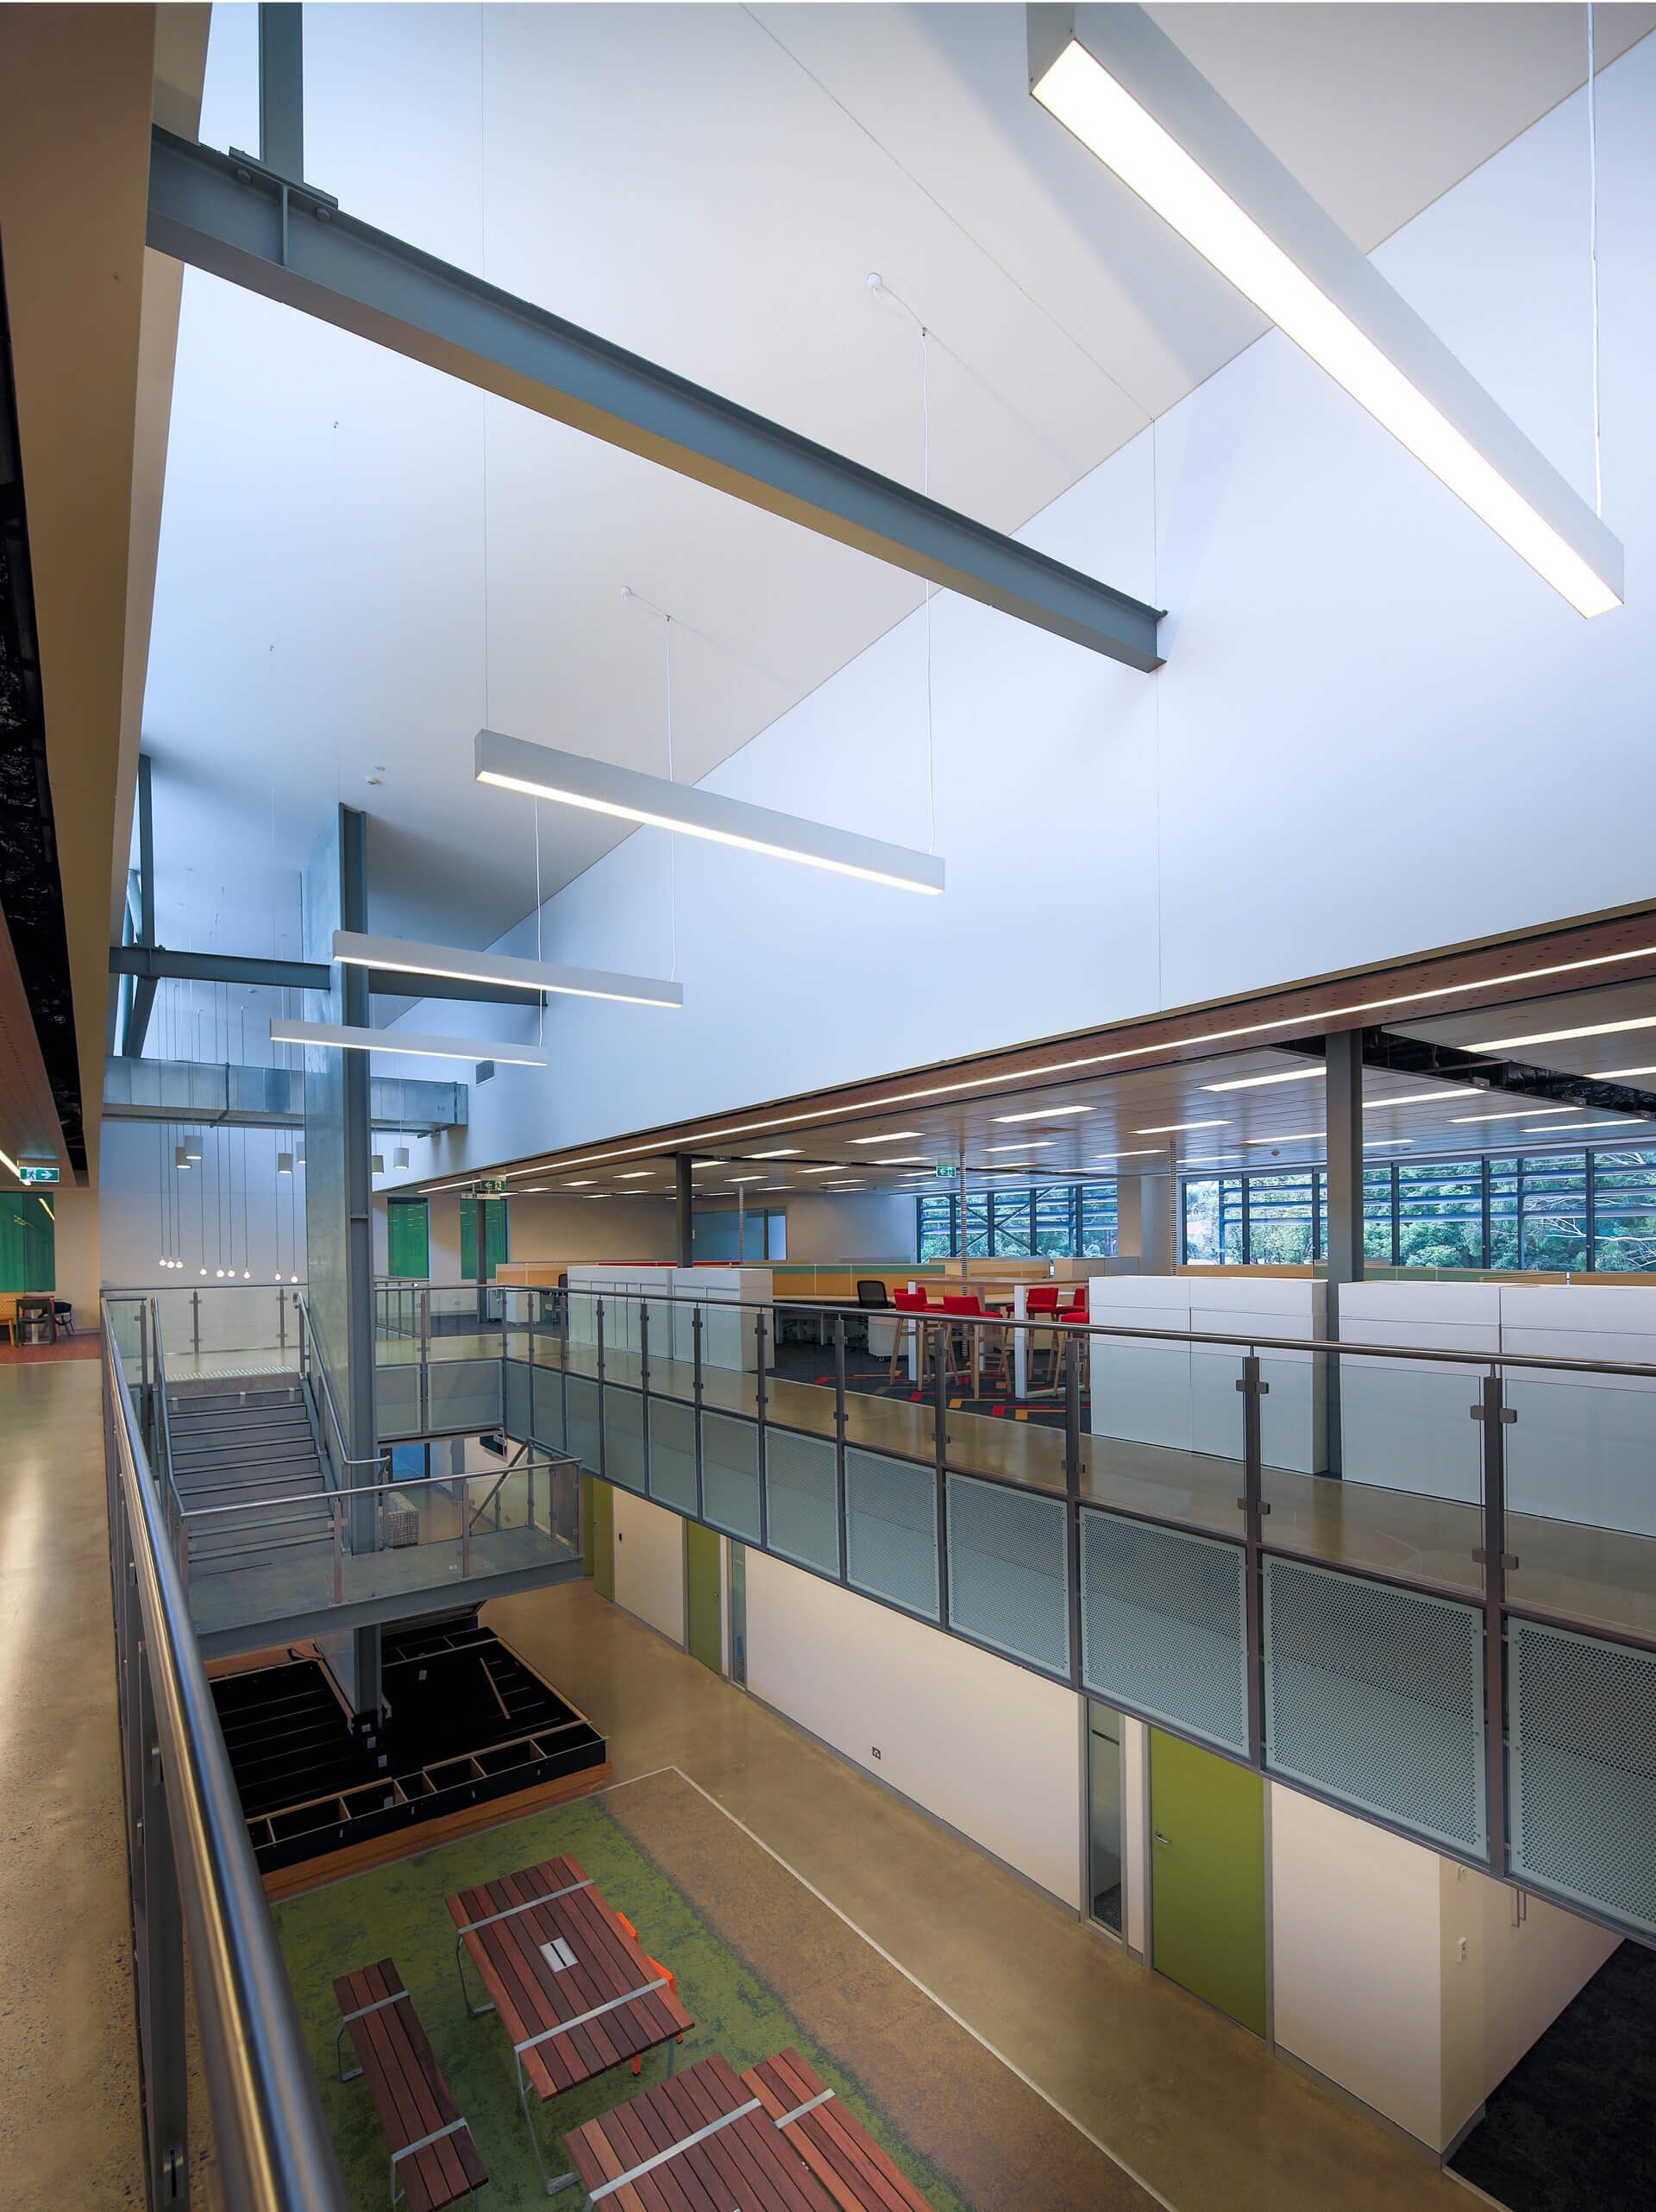 15 interior lighting rydalemere operations centre taylor construction commercial